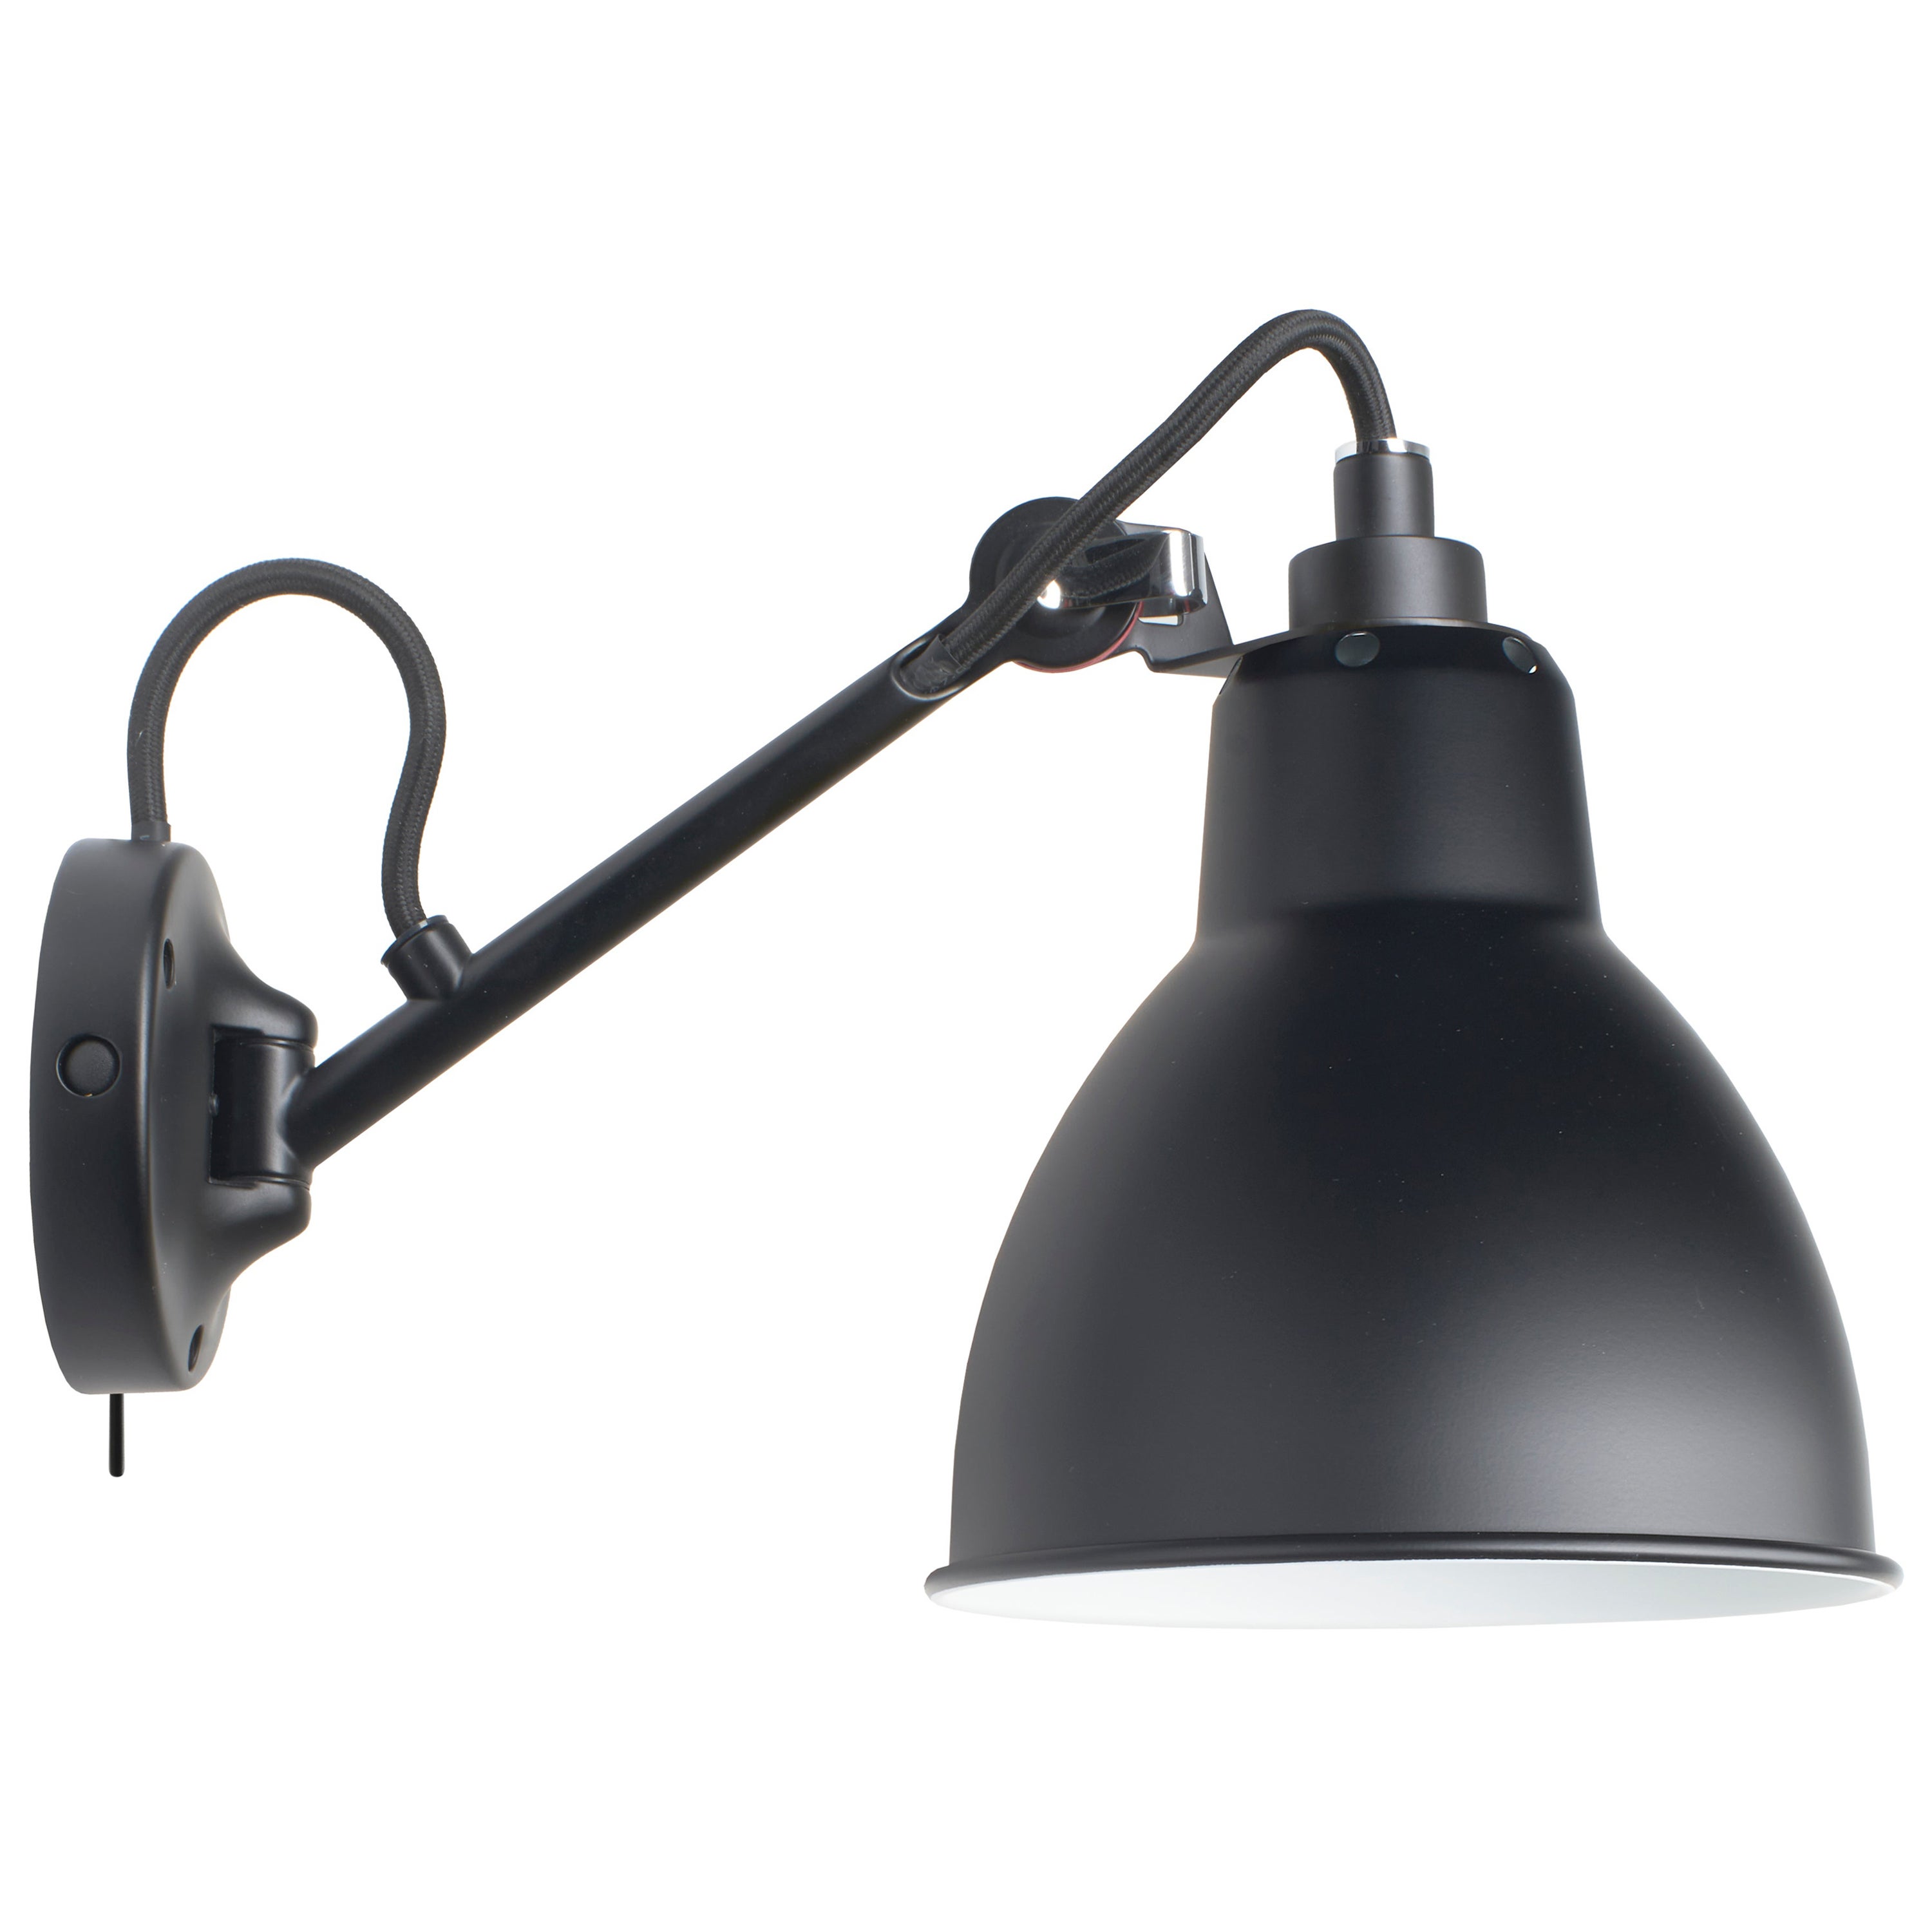 DCW Editions La Lampe Gras N°104 SW Wall Lamp in Black Arm and Black Shade For Sale